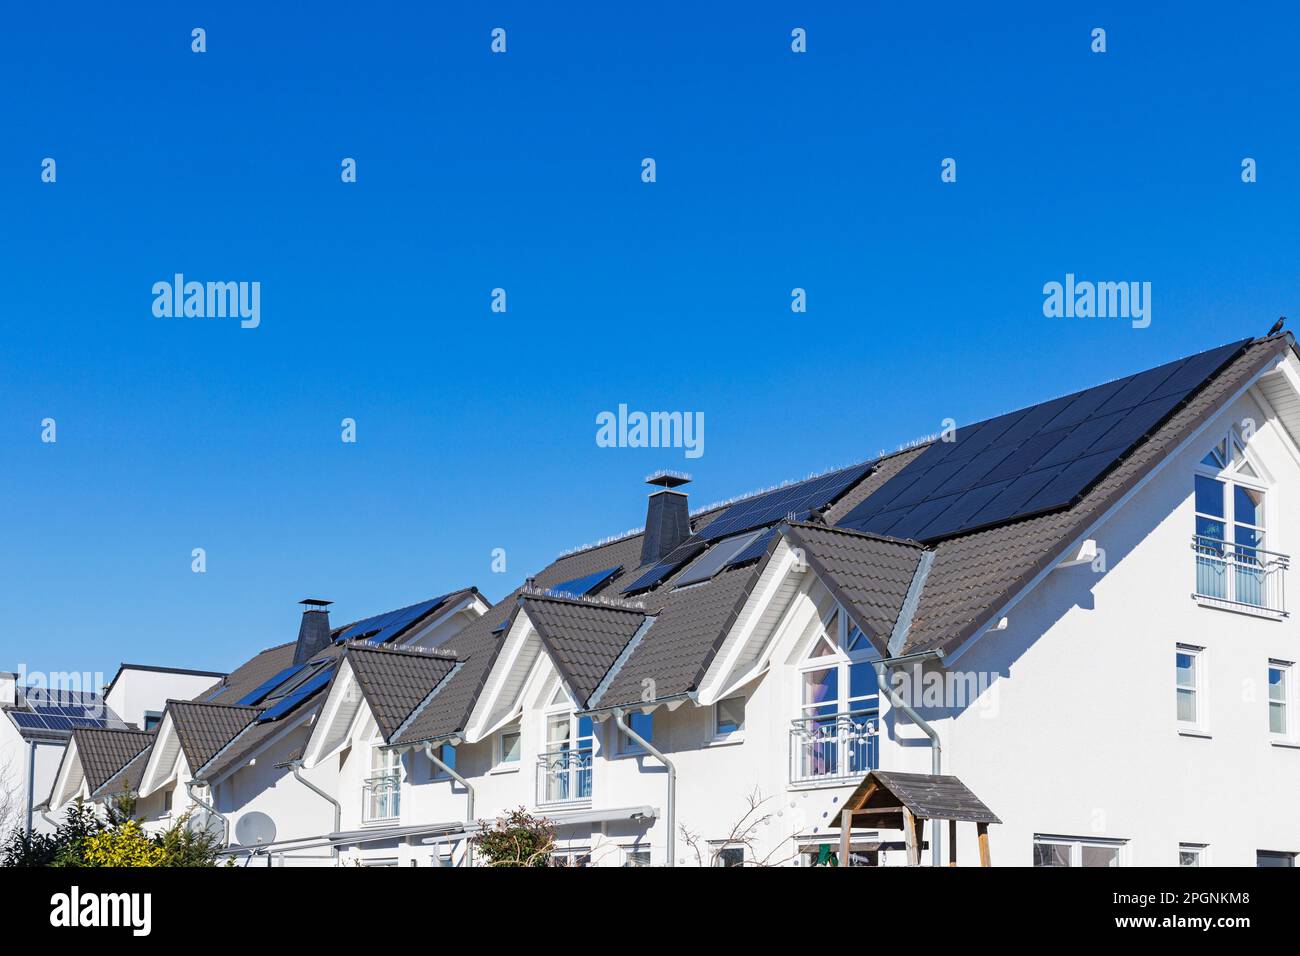 Germany, North Rhine Westphalia, Cologne, Clear sky over modern houses with solar roof panels Stock Photo